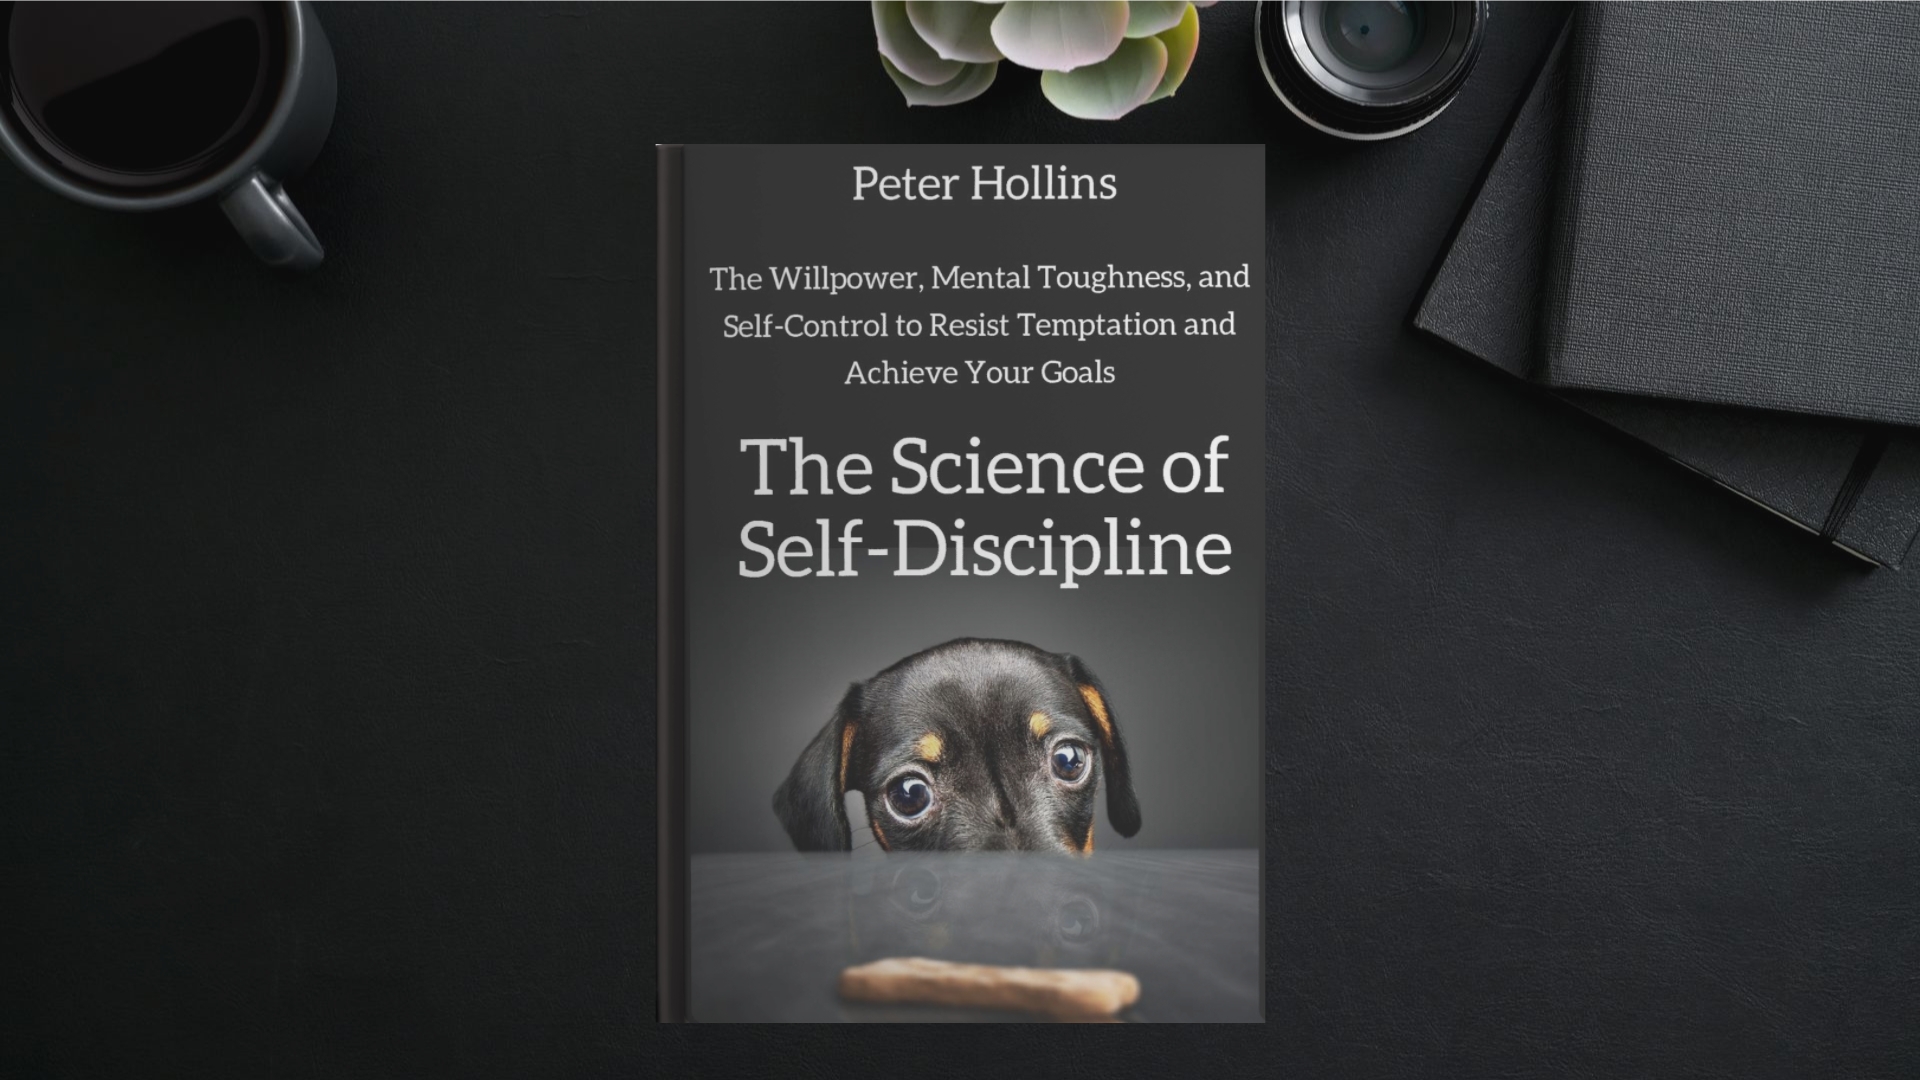 the science of self-discipline book